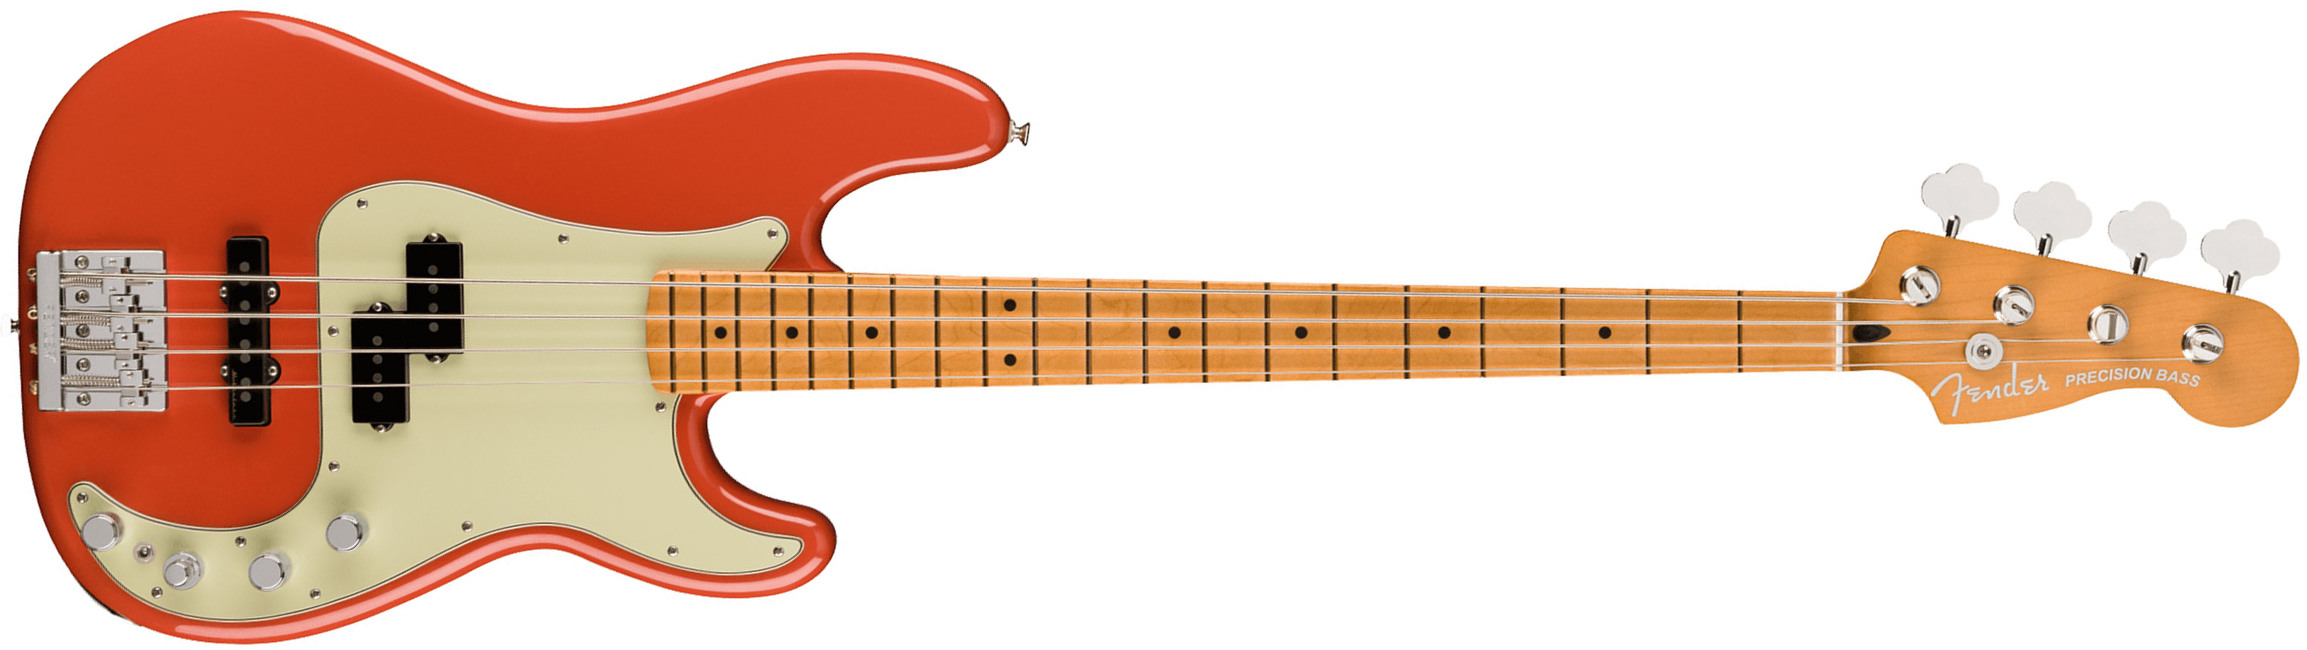 Fender Precision Bass Player Plus 2023 Mex Active Mn - Fiesta Red - Solid body electric bass - Main picture